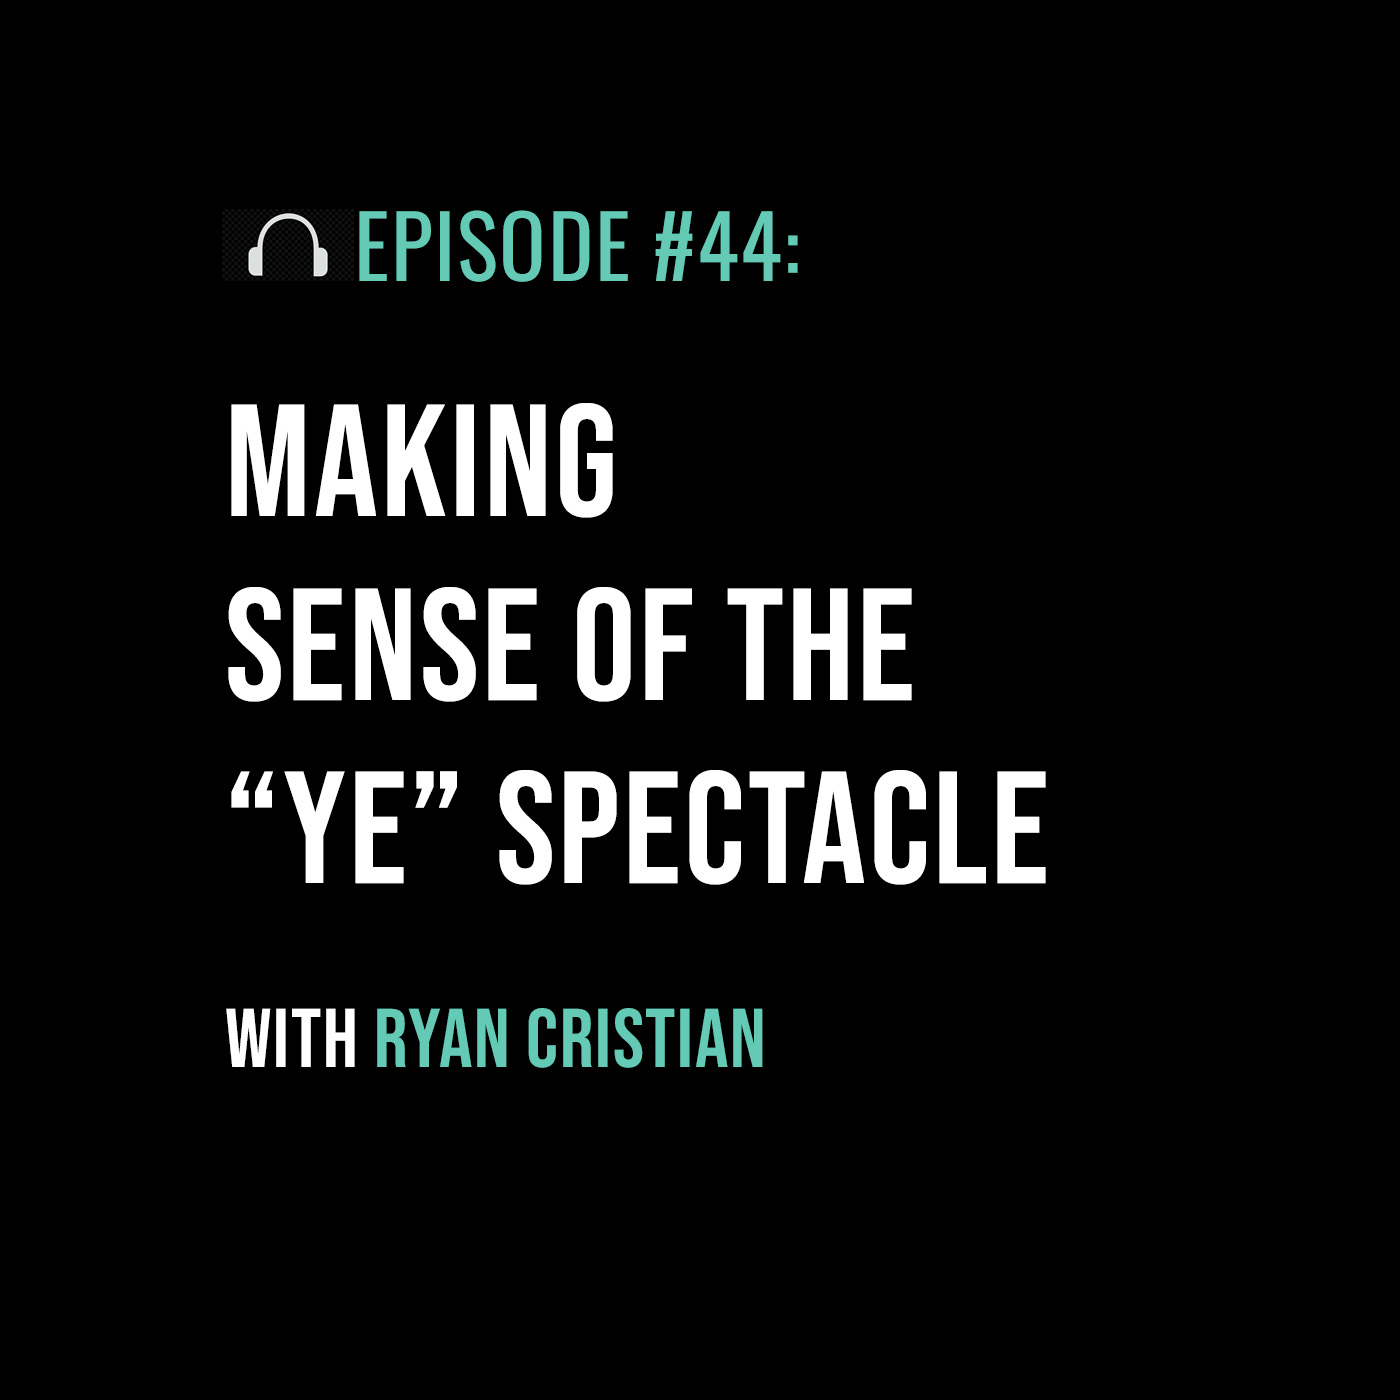 Making Sense of the “Ye” Spectacle with Ryan Cristian